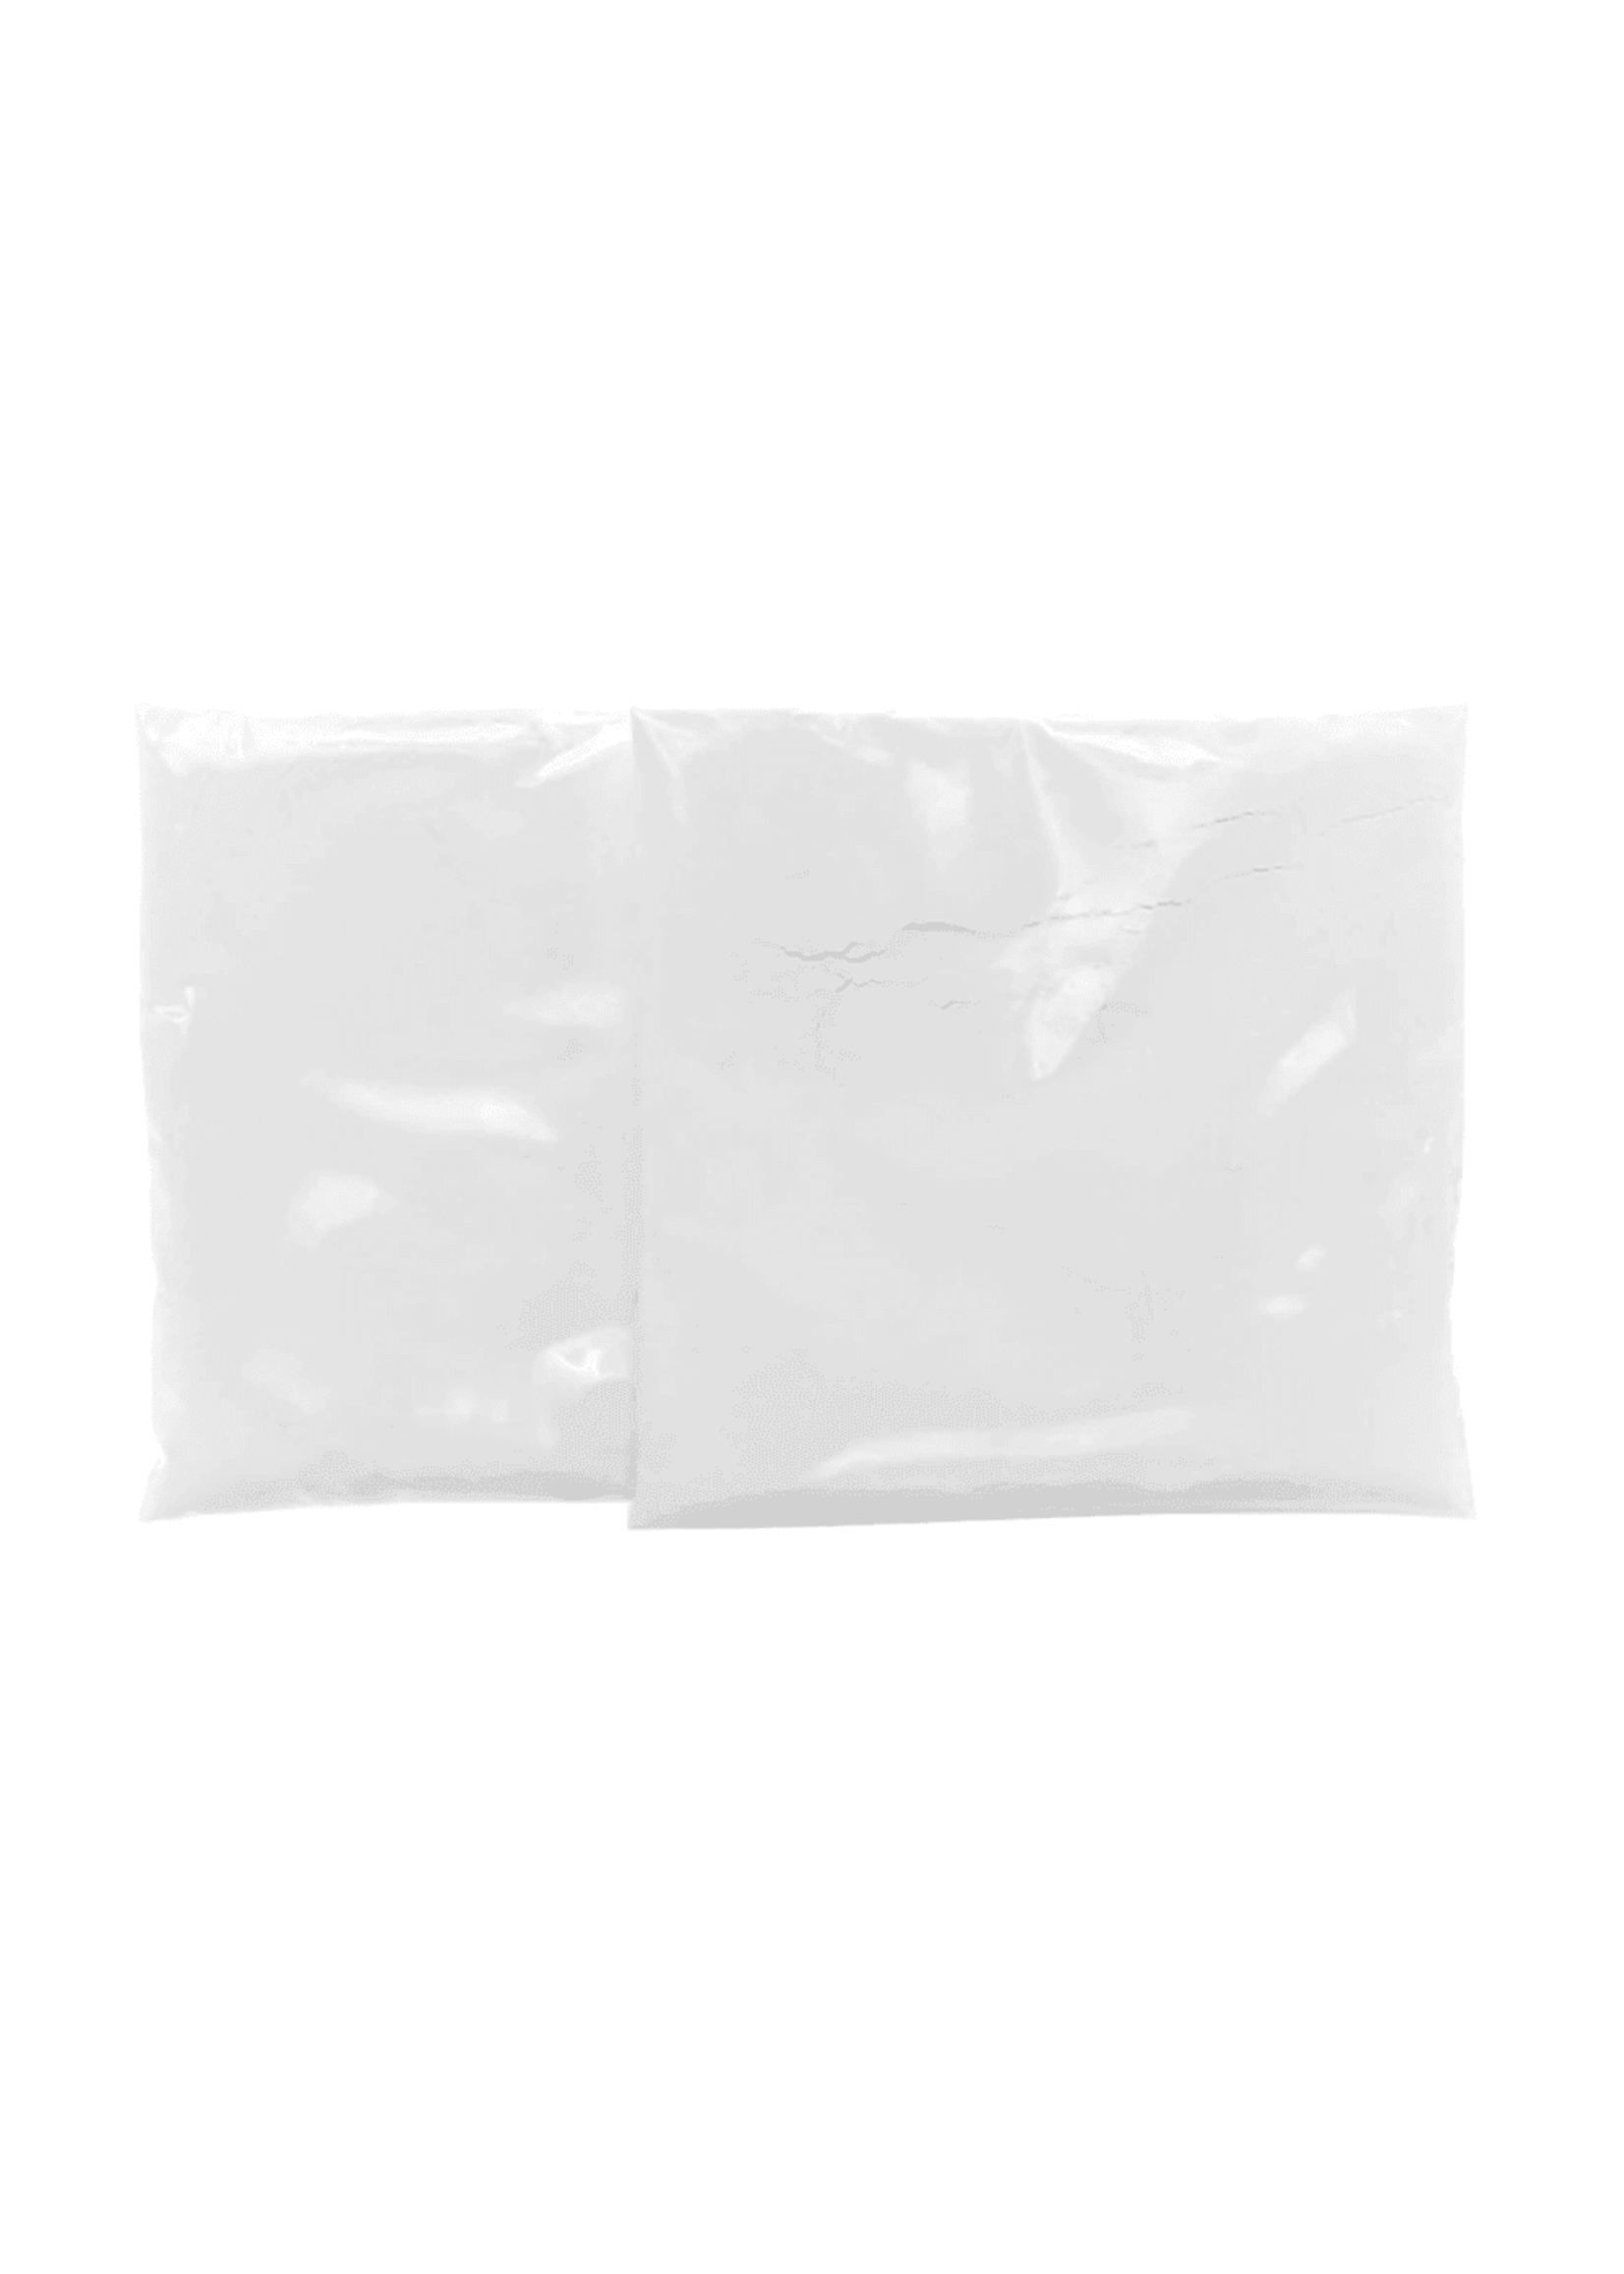 Clone a Willy Kit - Molding Powder Refill Bag